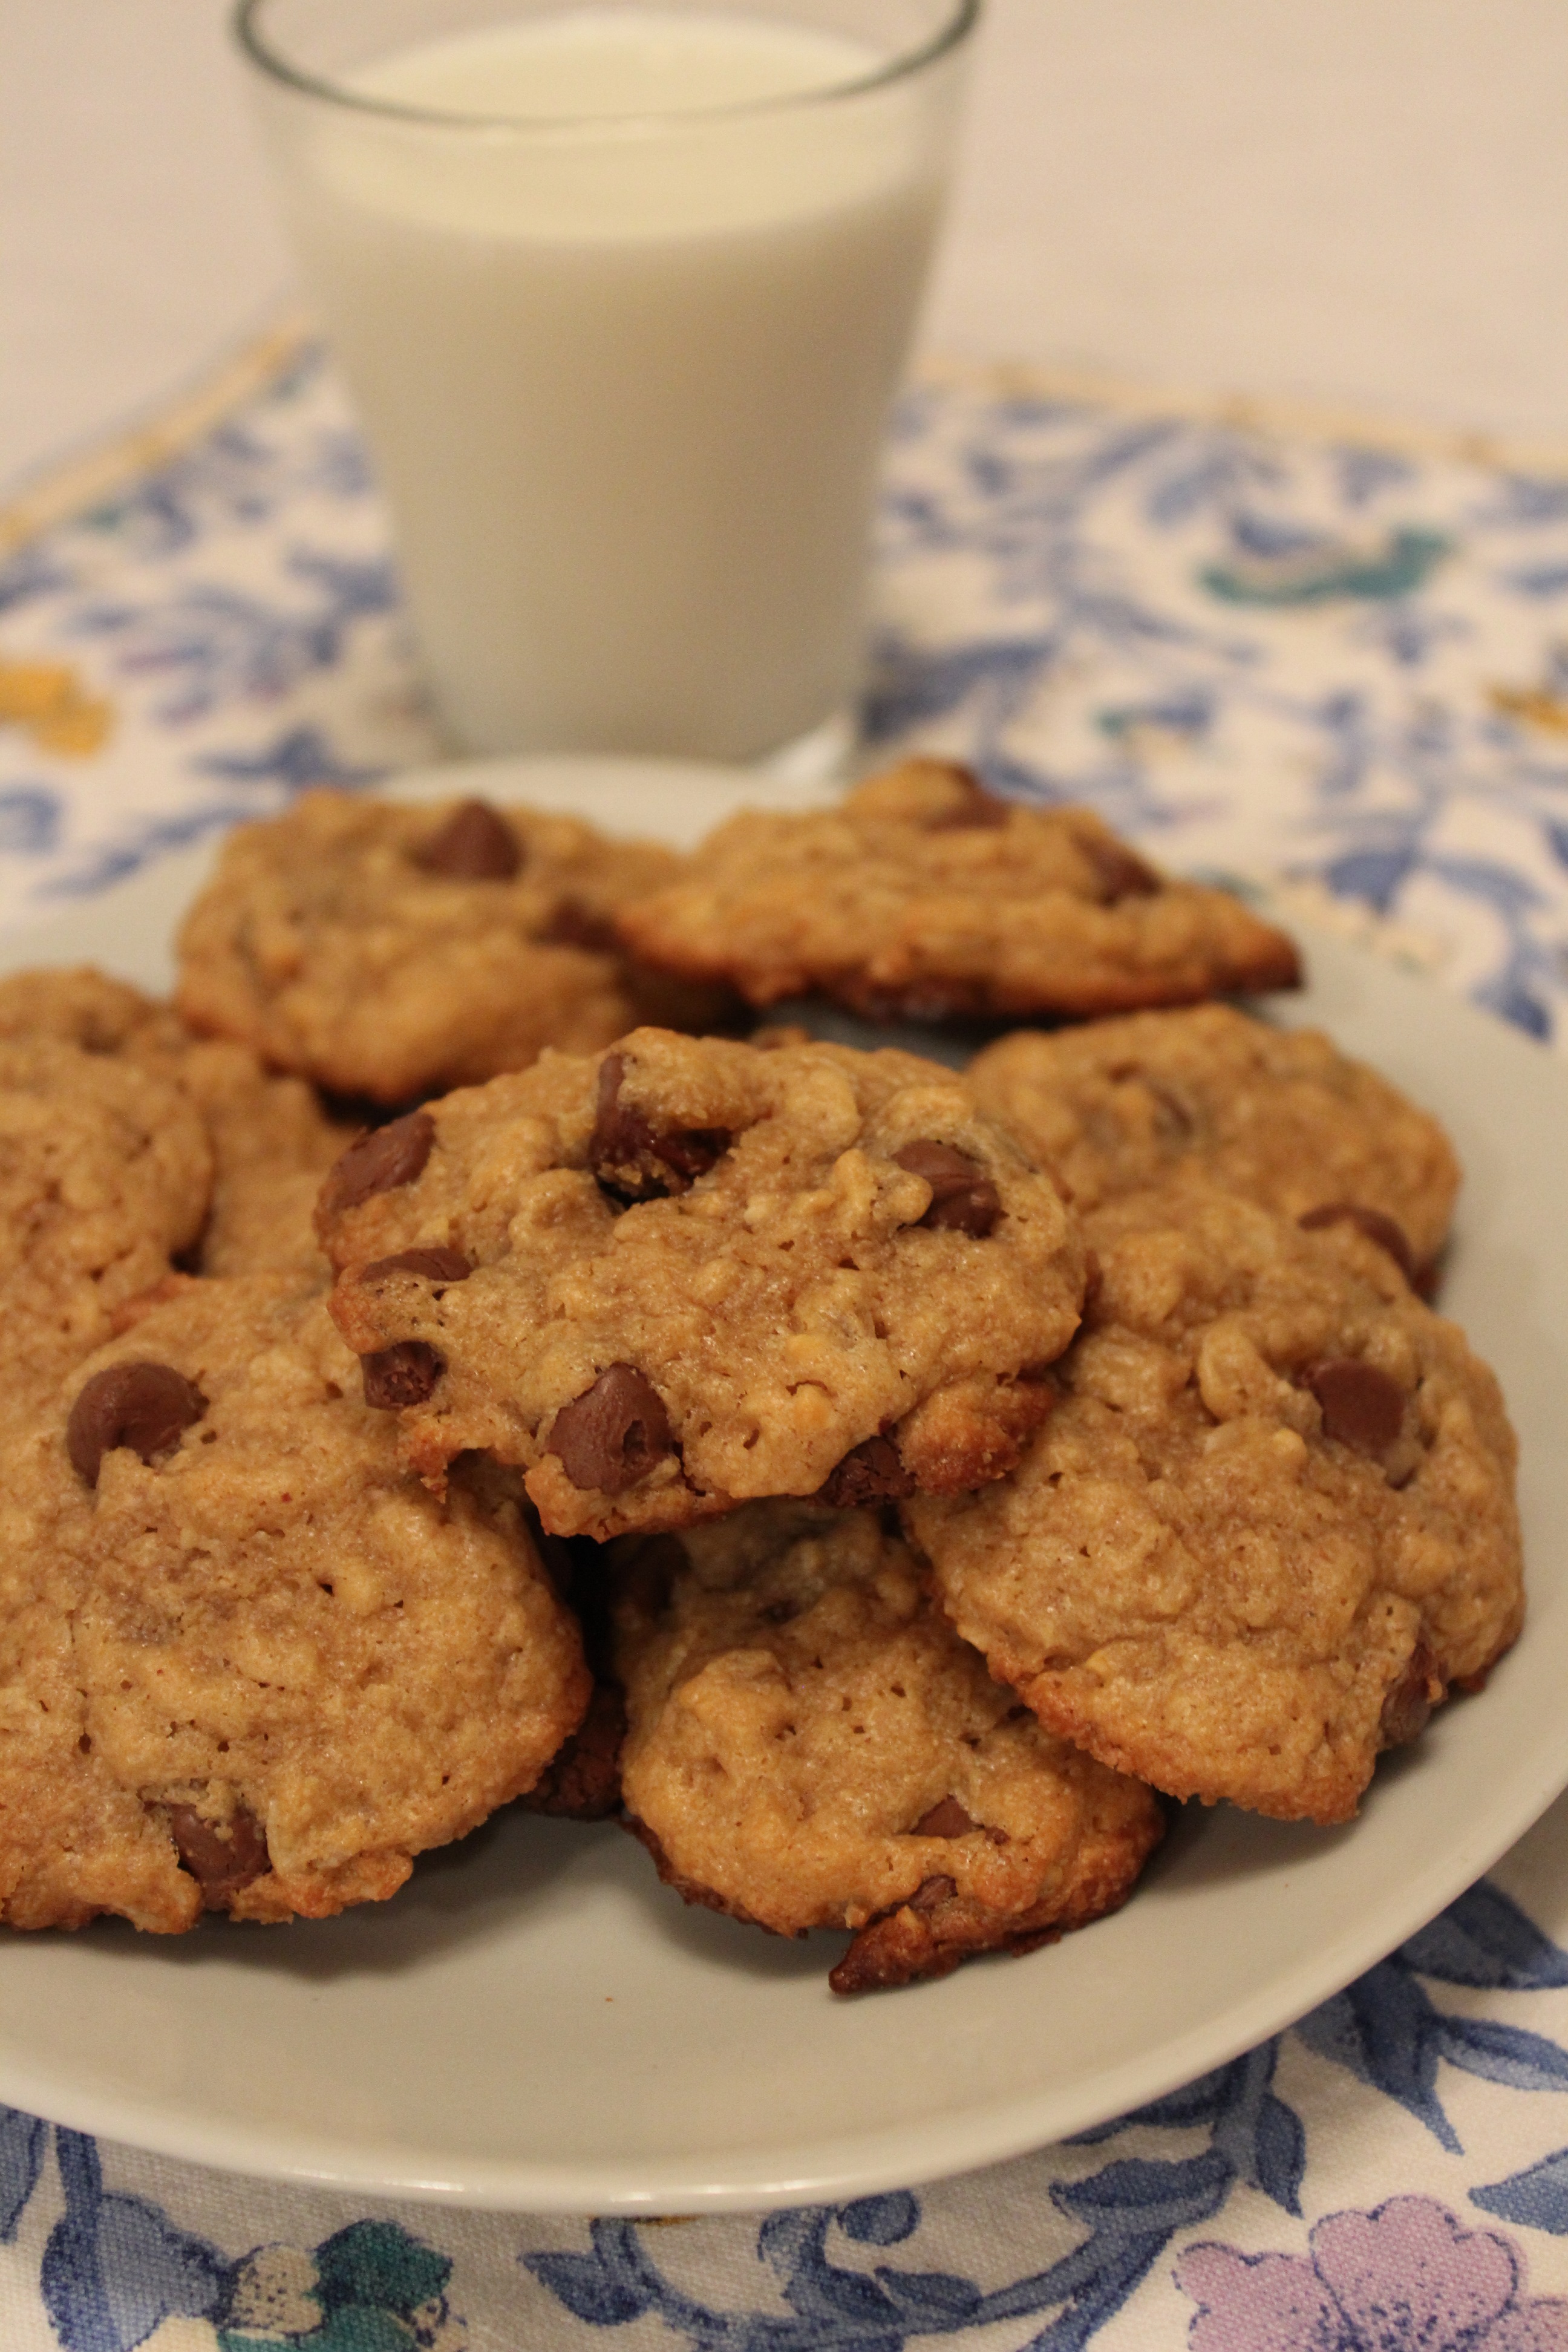 Plate of Easy Peanut Butter Oatmeal Chocolate Chip Cookies